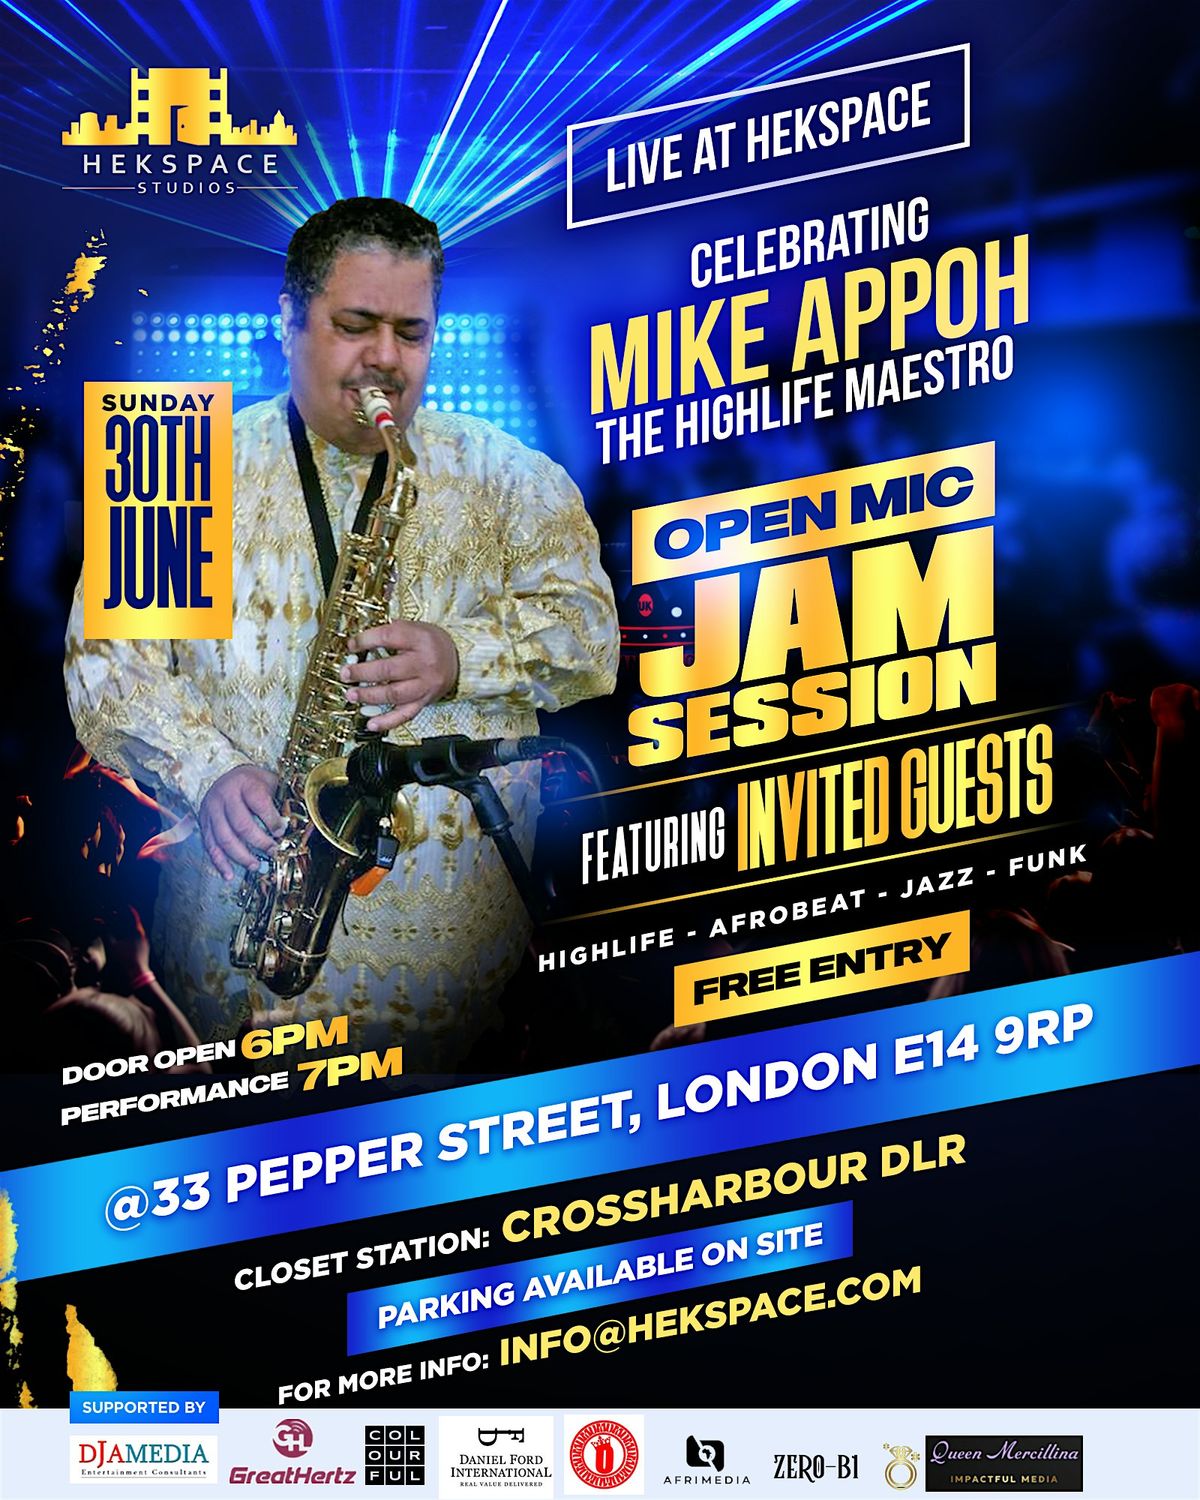 Mike Appoh Tribute - Live @ Hekspace Music Jam